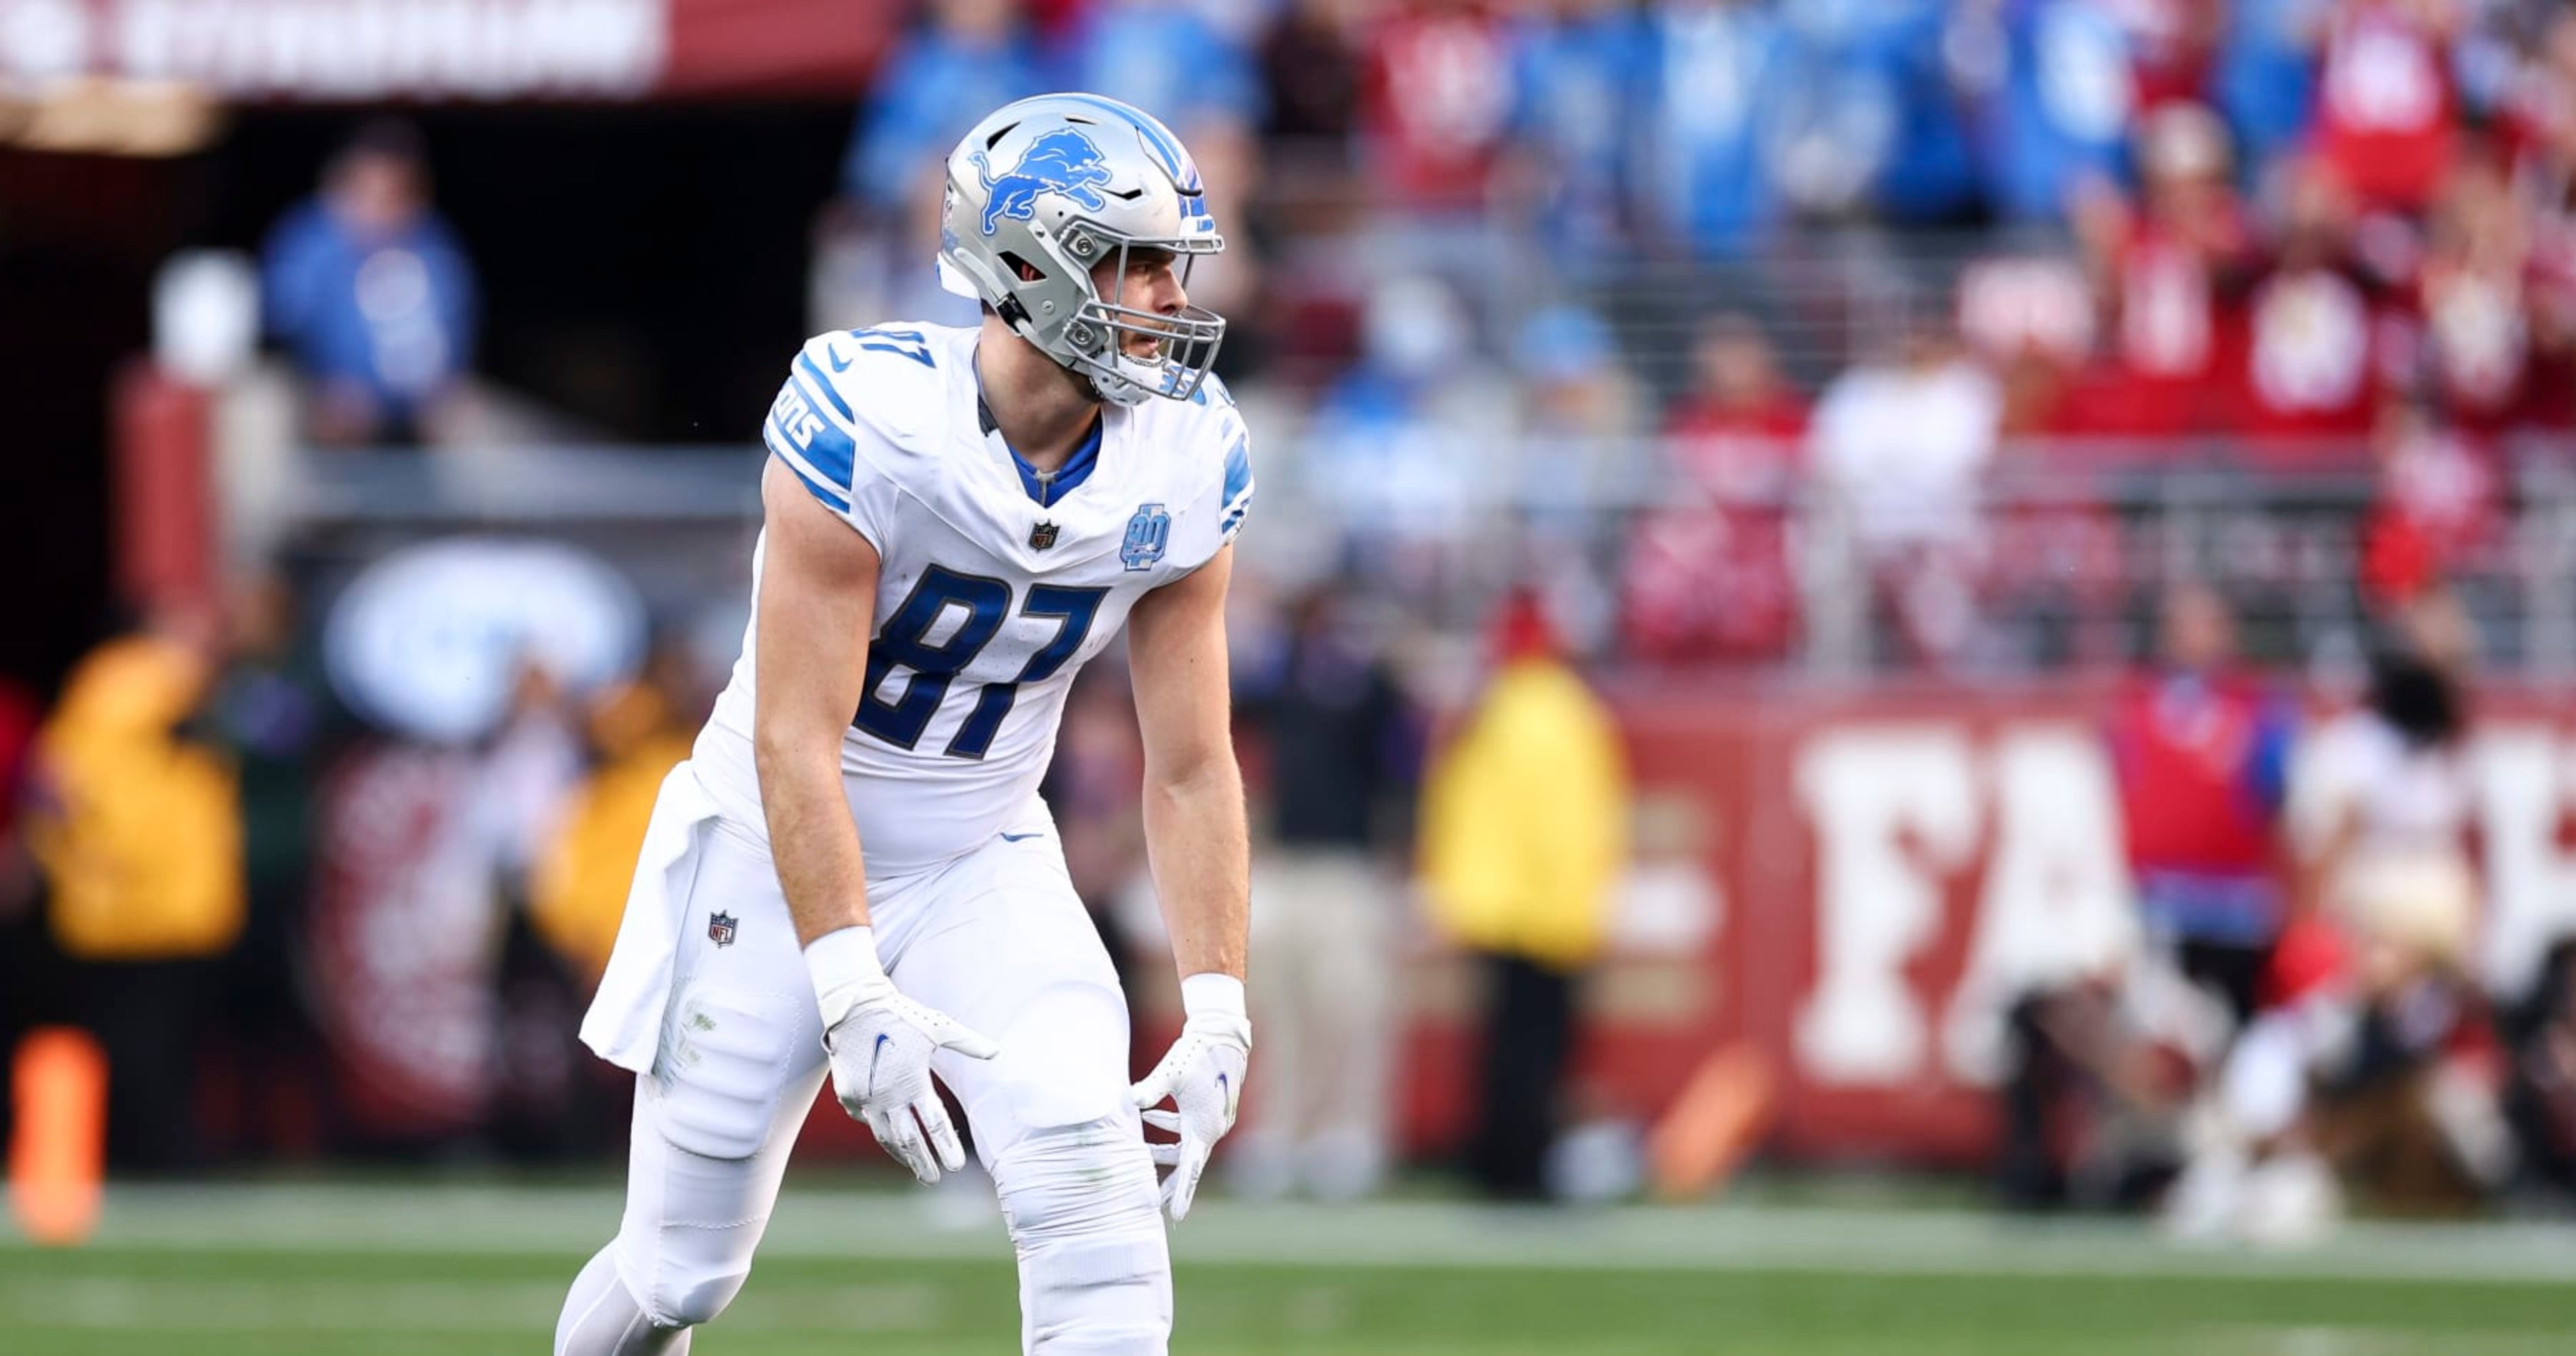 NFL Scout Hypes 'F--king Awesome' Sam LaPorta After Breakout Rookie Season with Lions